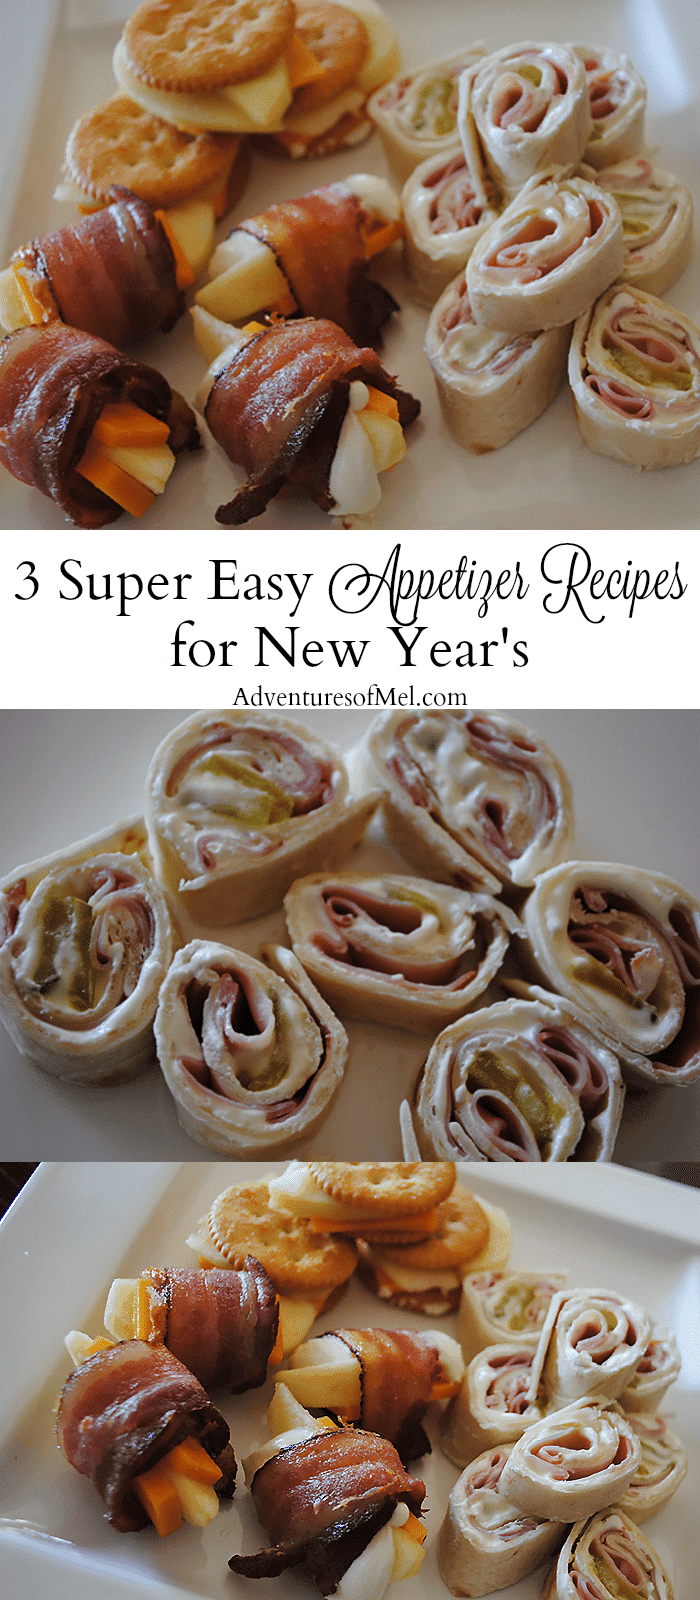 Hosting a New Year's Eve party or celebration? Here are 3 ideas for super easy appetizer recipes. Easy recipes and bacon? Yes please!